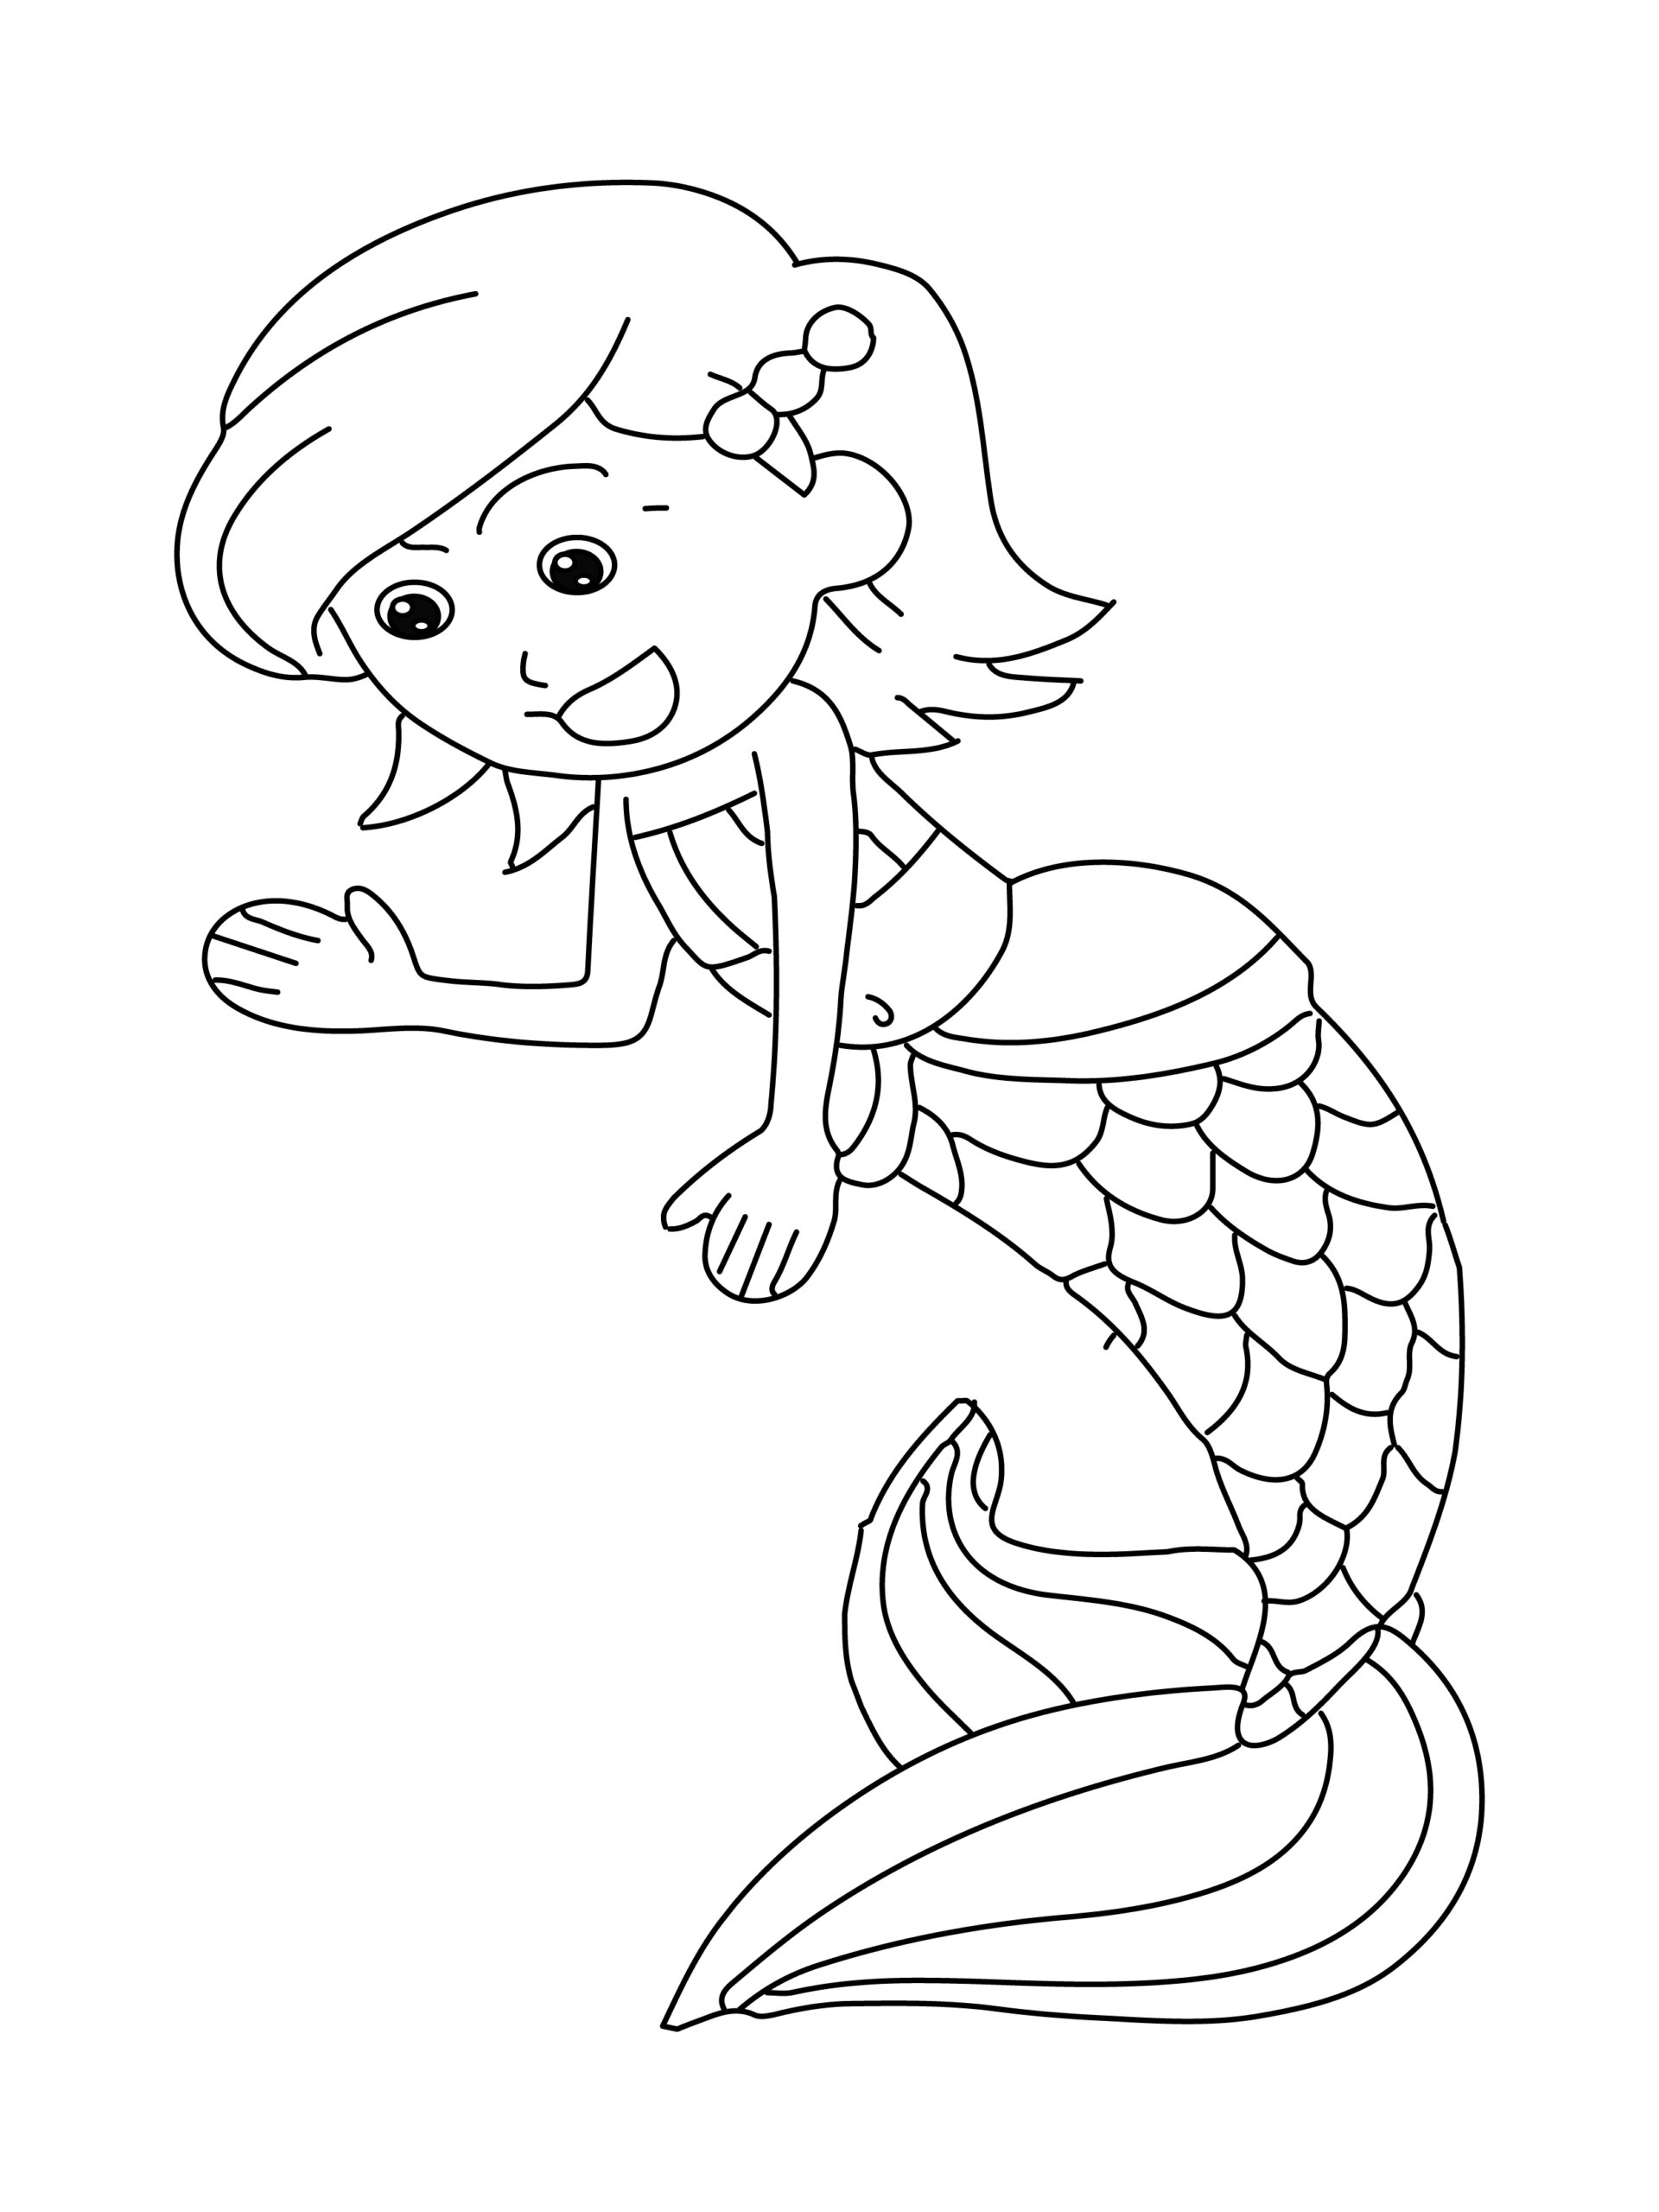 Cute Mermaid Coloring Page - Free Printable Coloring Pages for Kids